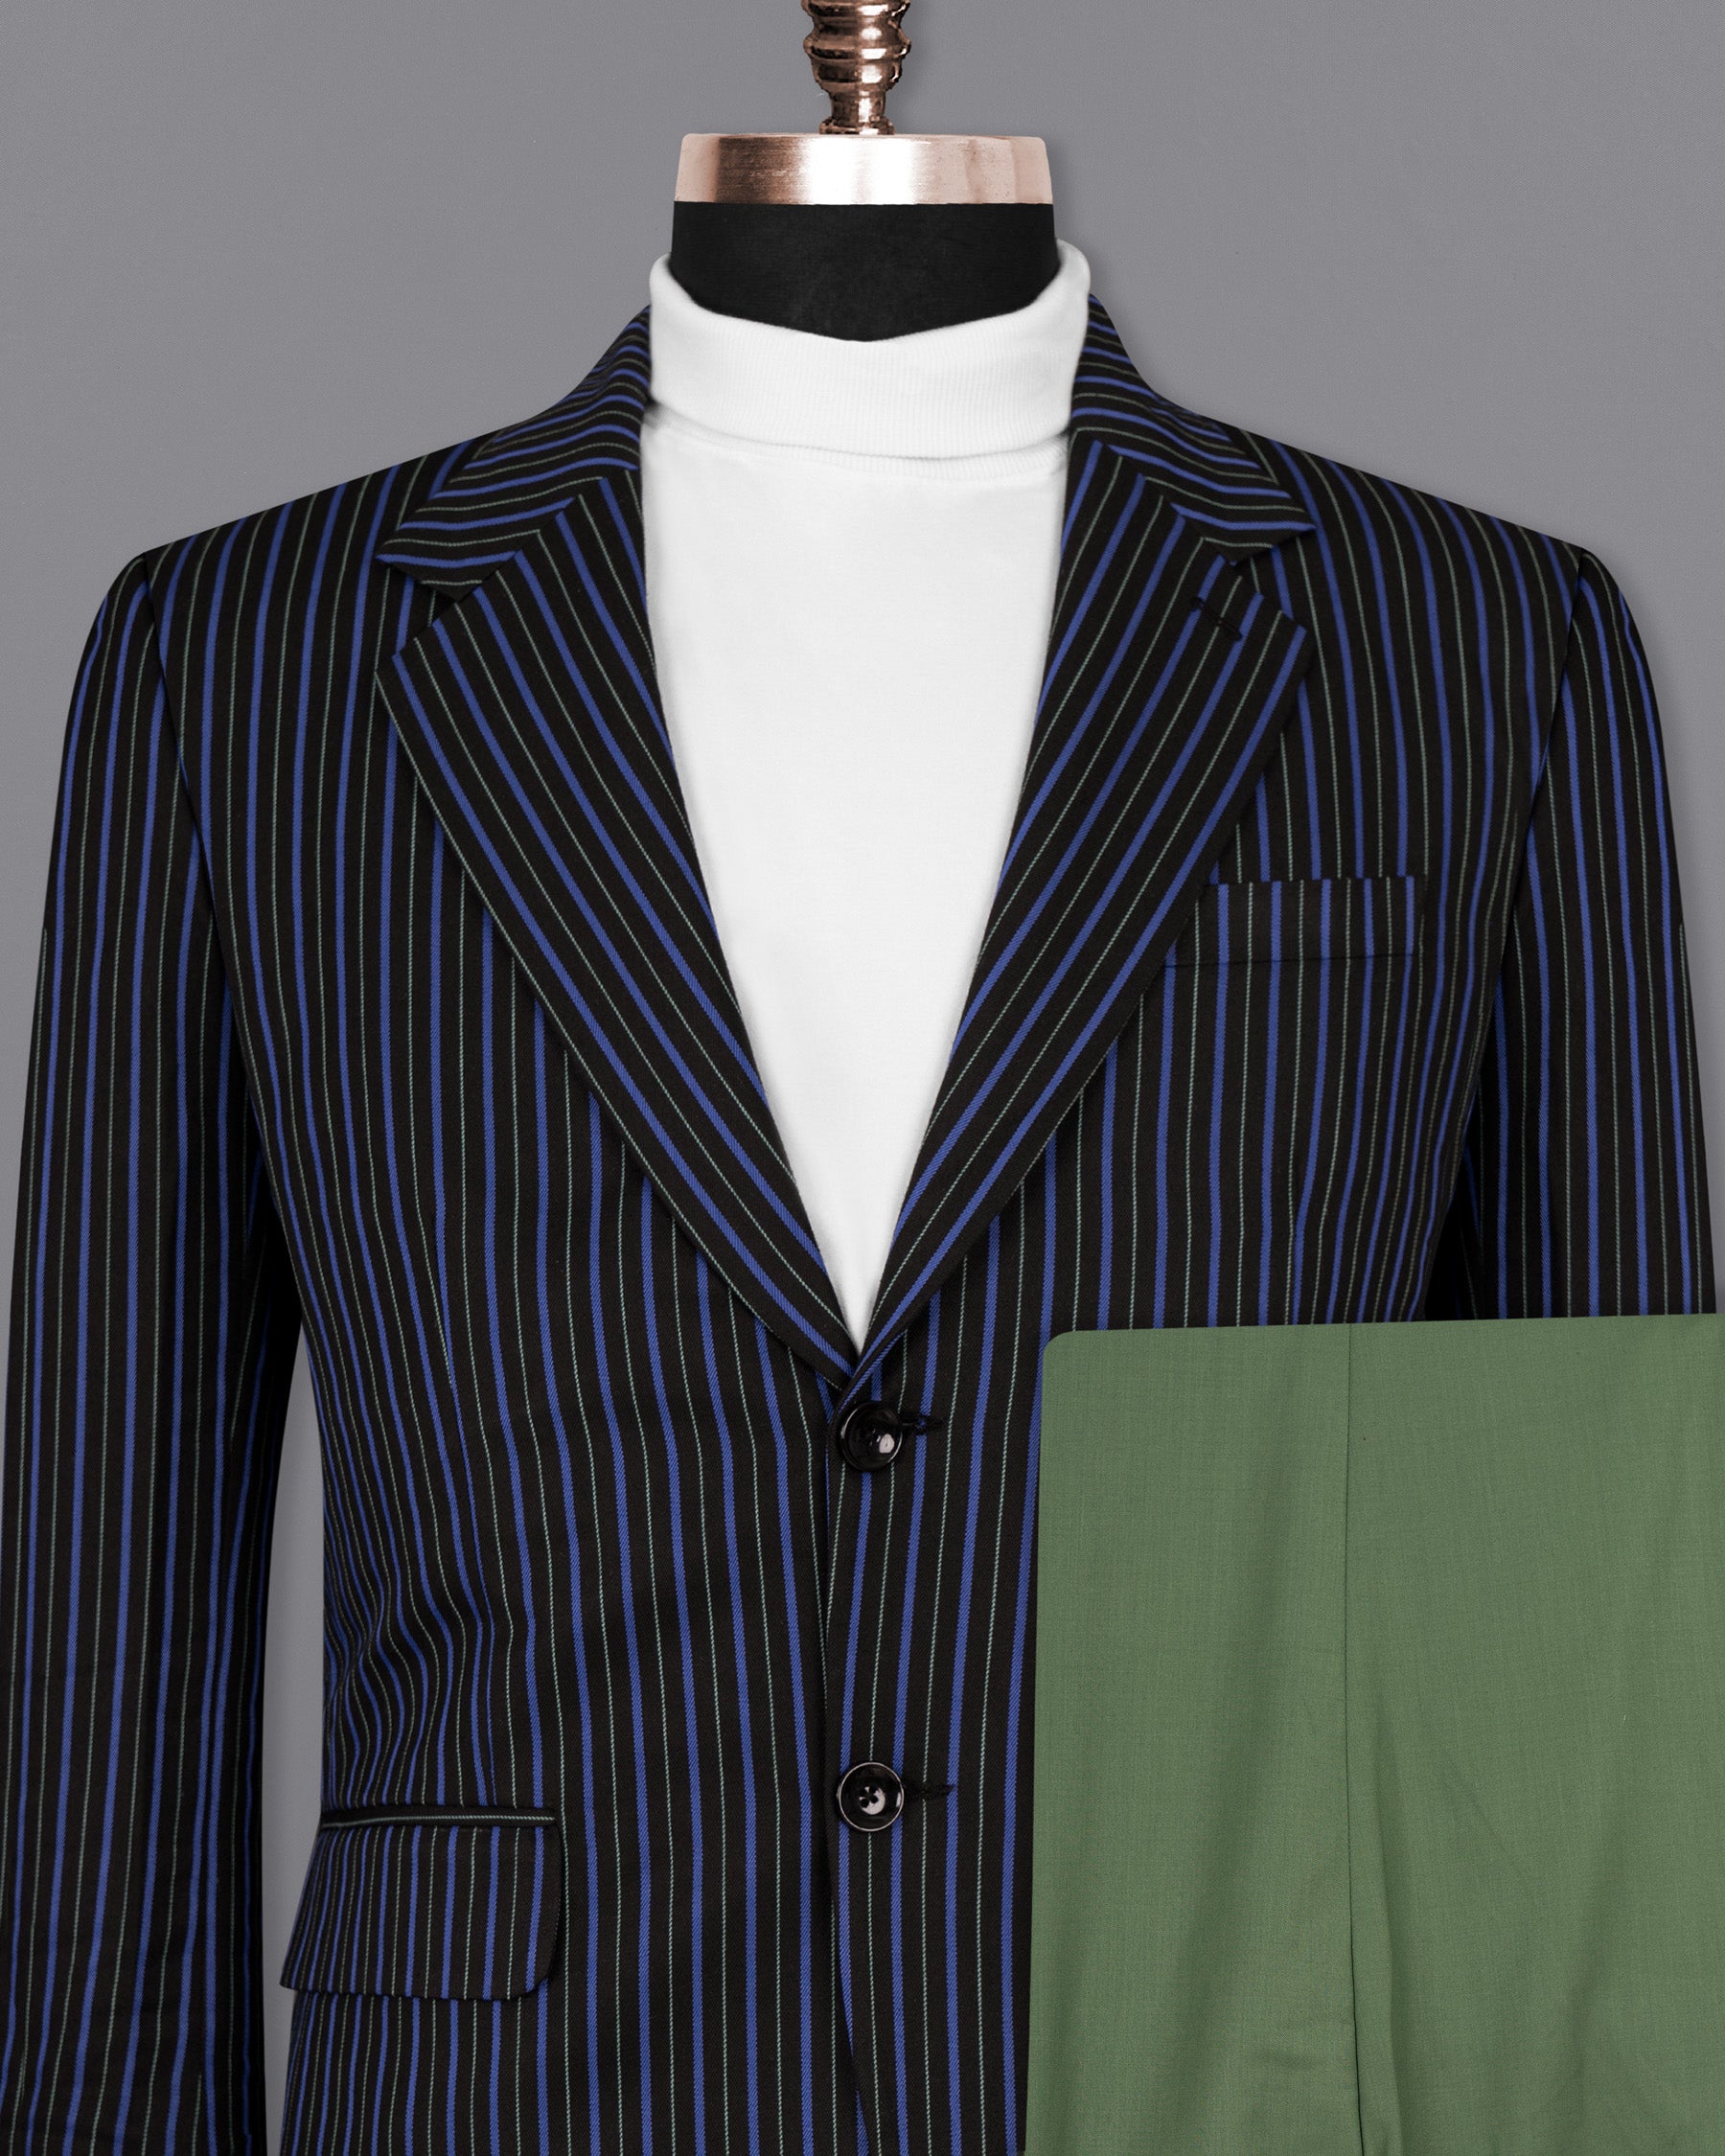 Jade STack and Mariner STue Striped Woolrich Suit ST1519-SB-36, ST1519-SB-38, ST1519-SB-40, ST1519-SB-42, ST1519-SB-44, ST1519-SB-46, ST1519-SB-48, ST1519-SB-50, ST1519-SB-52, ST1519-SB-54, ST1519-SB-56, ST1519-SB-58, ST1519-SB-60